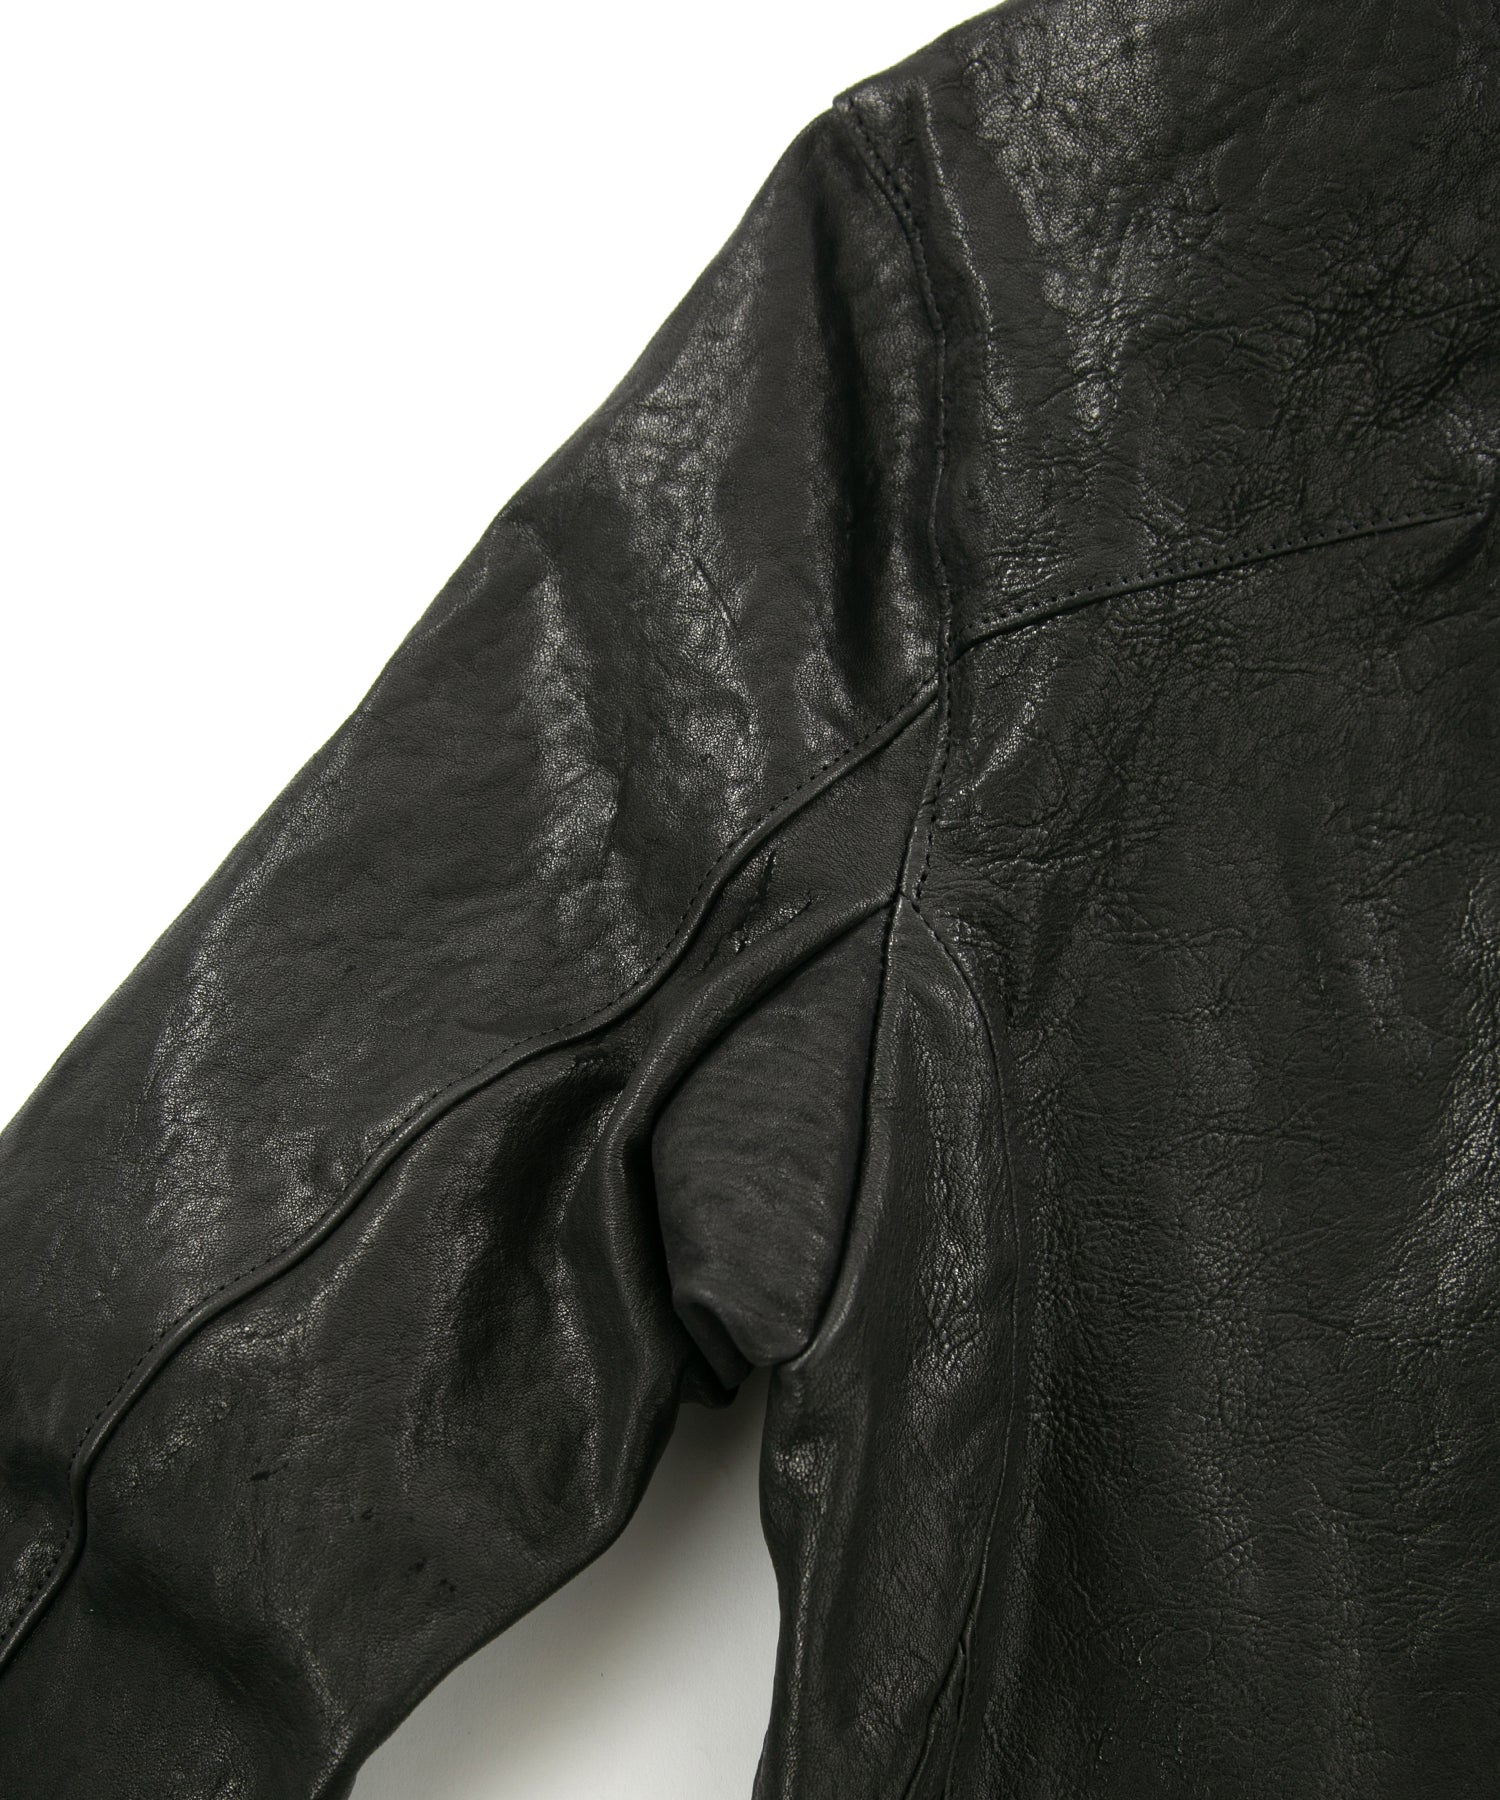 Load image into Gallery viewer, Pit Vegetable Full Tanned Shrank Horsehide SLATER Single Riders Jacket - BLACK